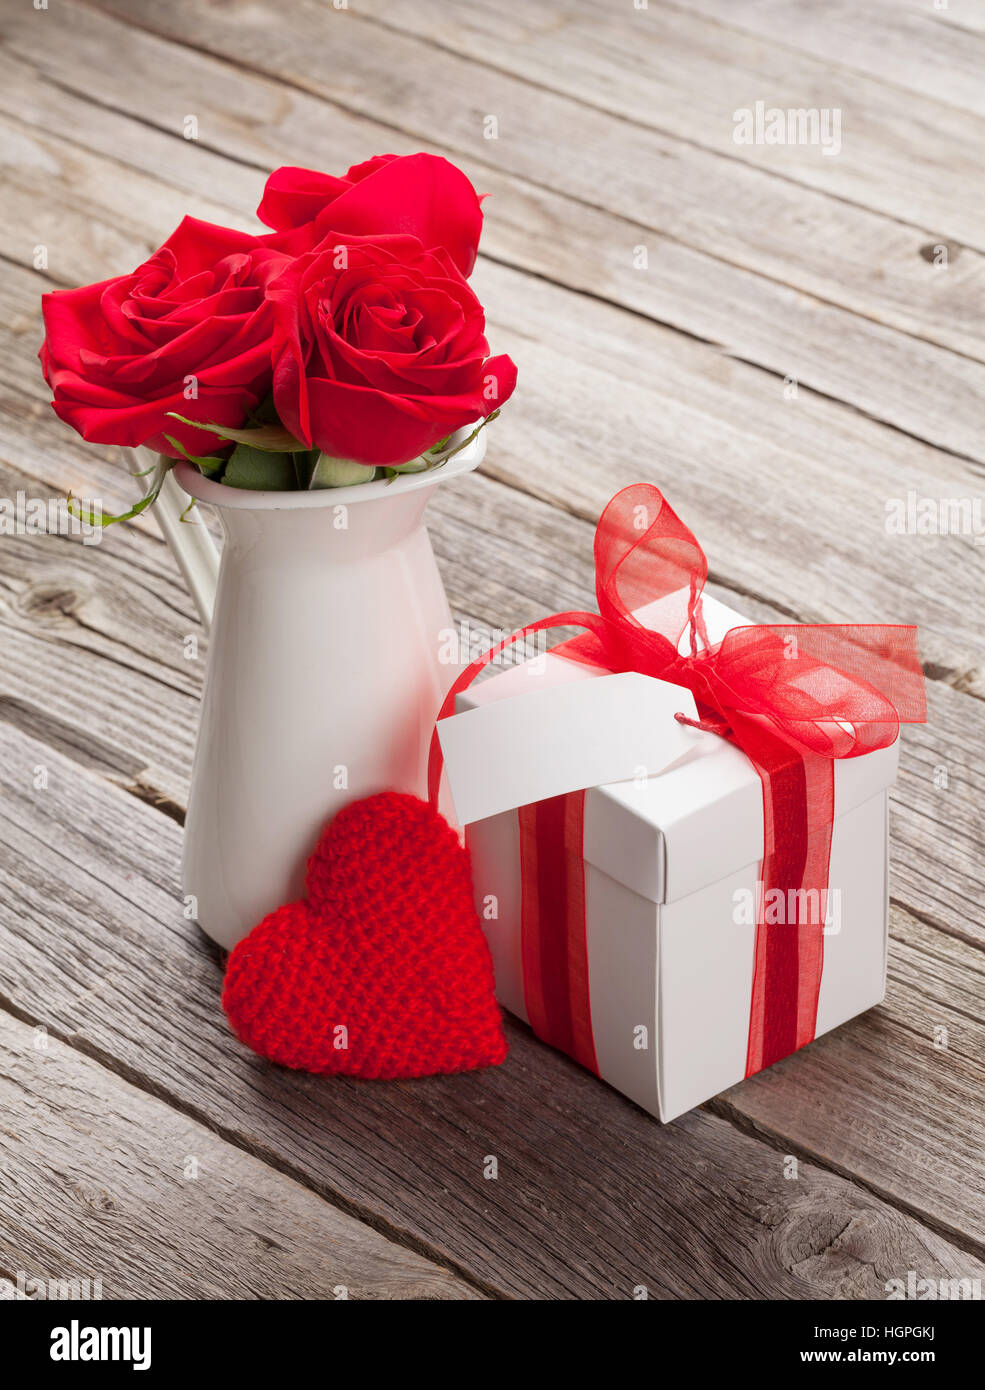 Red rose flowers in pitcher and Valentines day gift box on wooden table Stock Photo